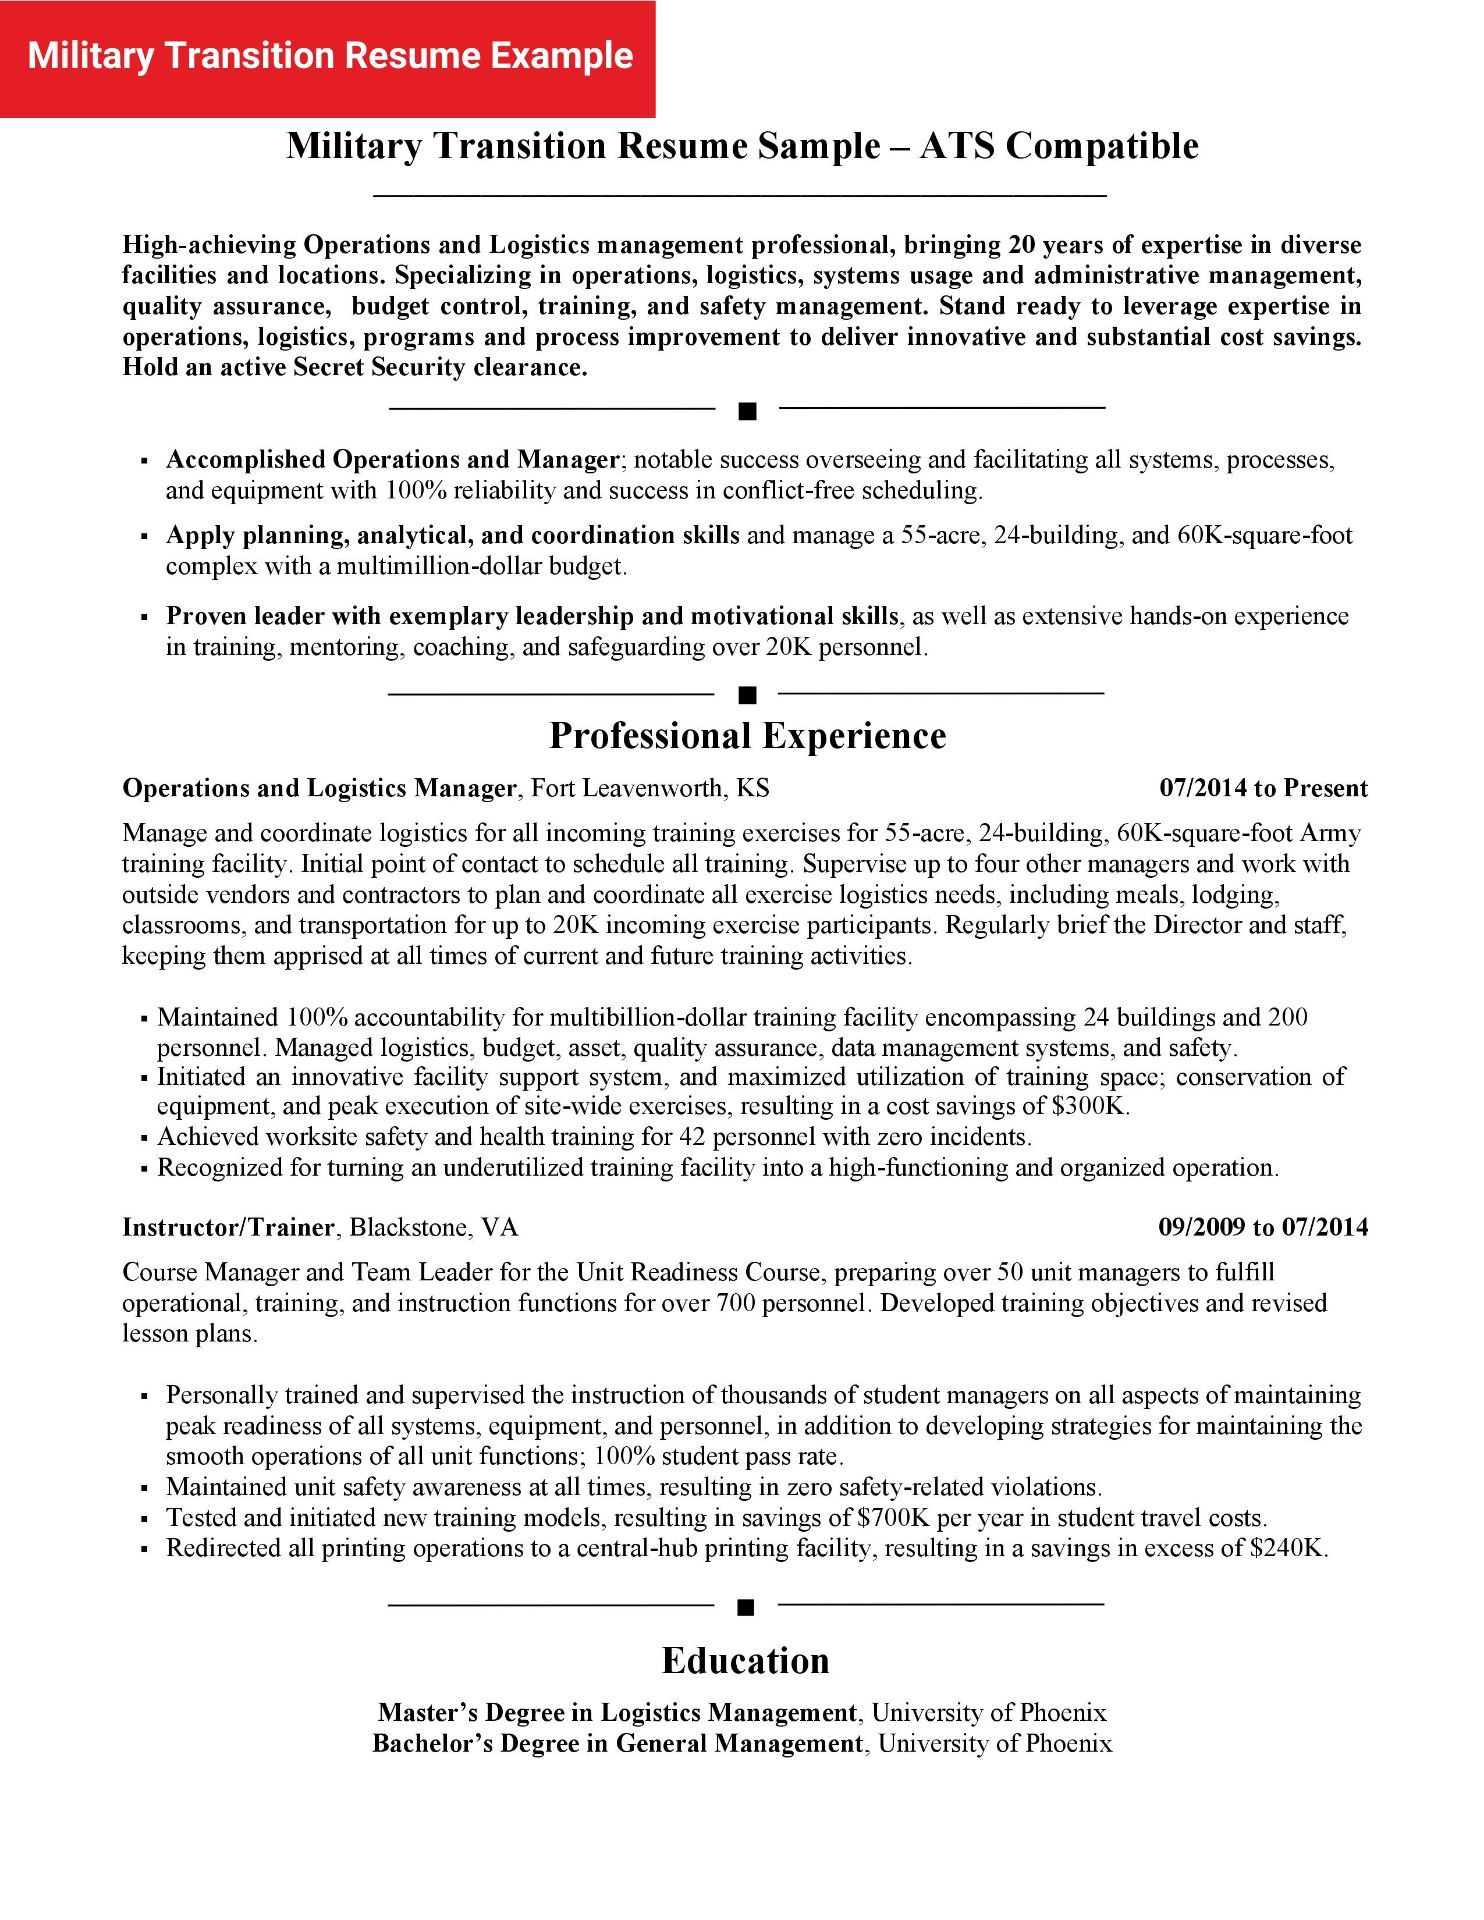 Sample Military to Civilian Transition Resume 7 Free Federal Resume Samples & Writing Tips and Trends